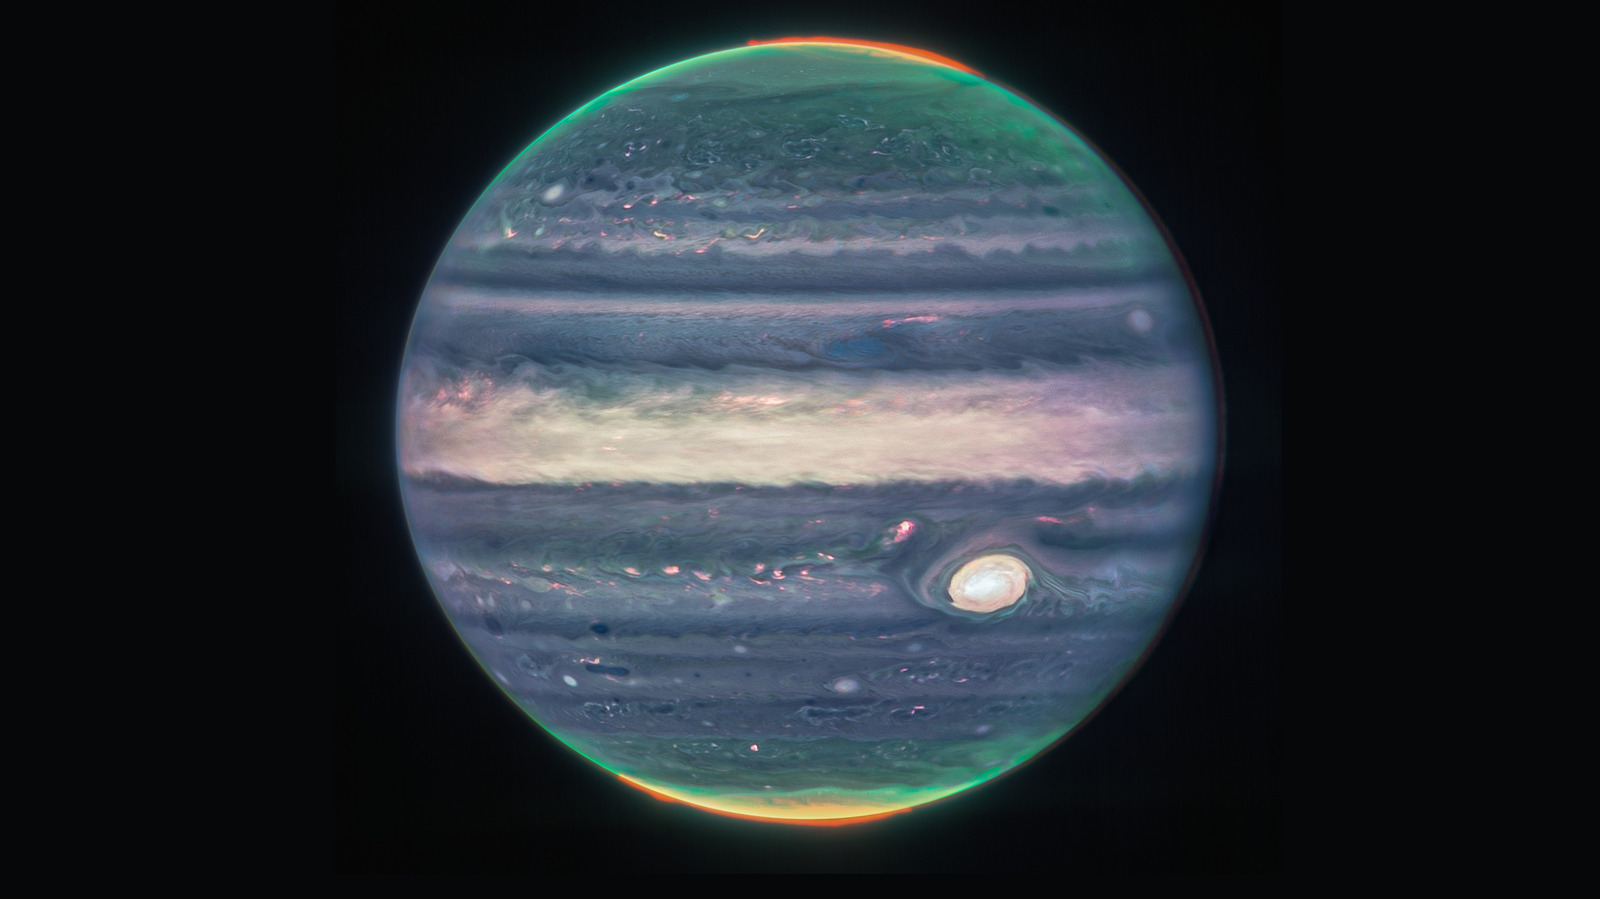 james-webb-space-telescope-snaps-incredible-photos-of-jupiter-and-its-auroras